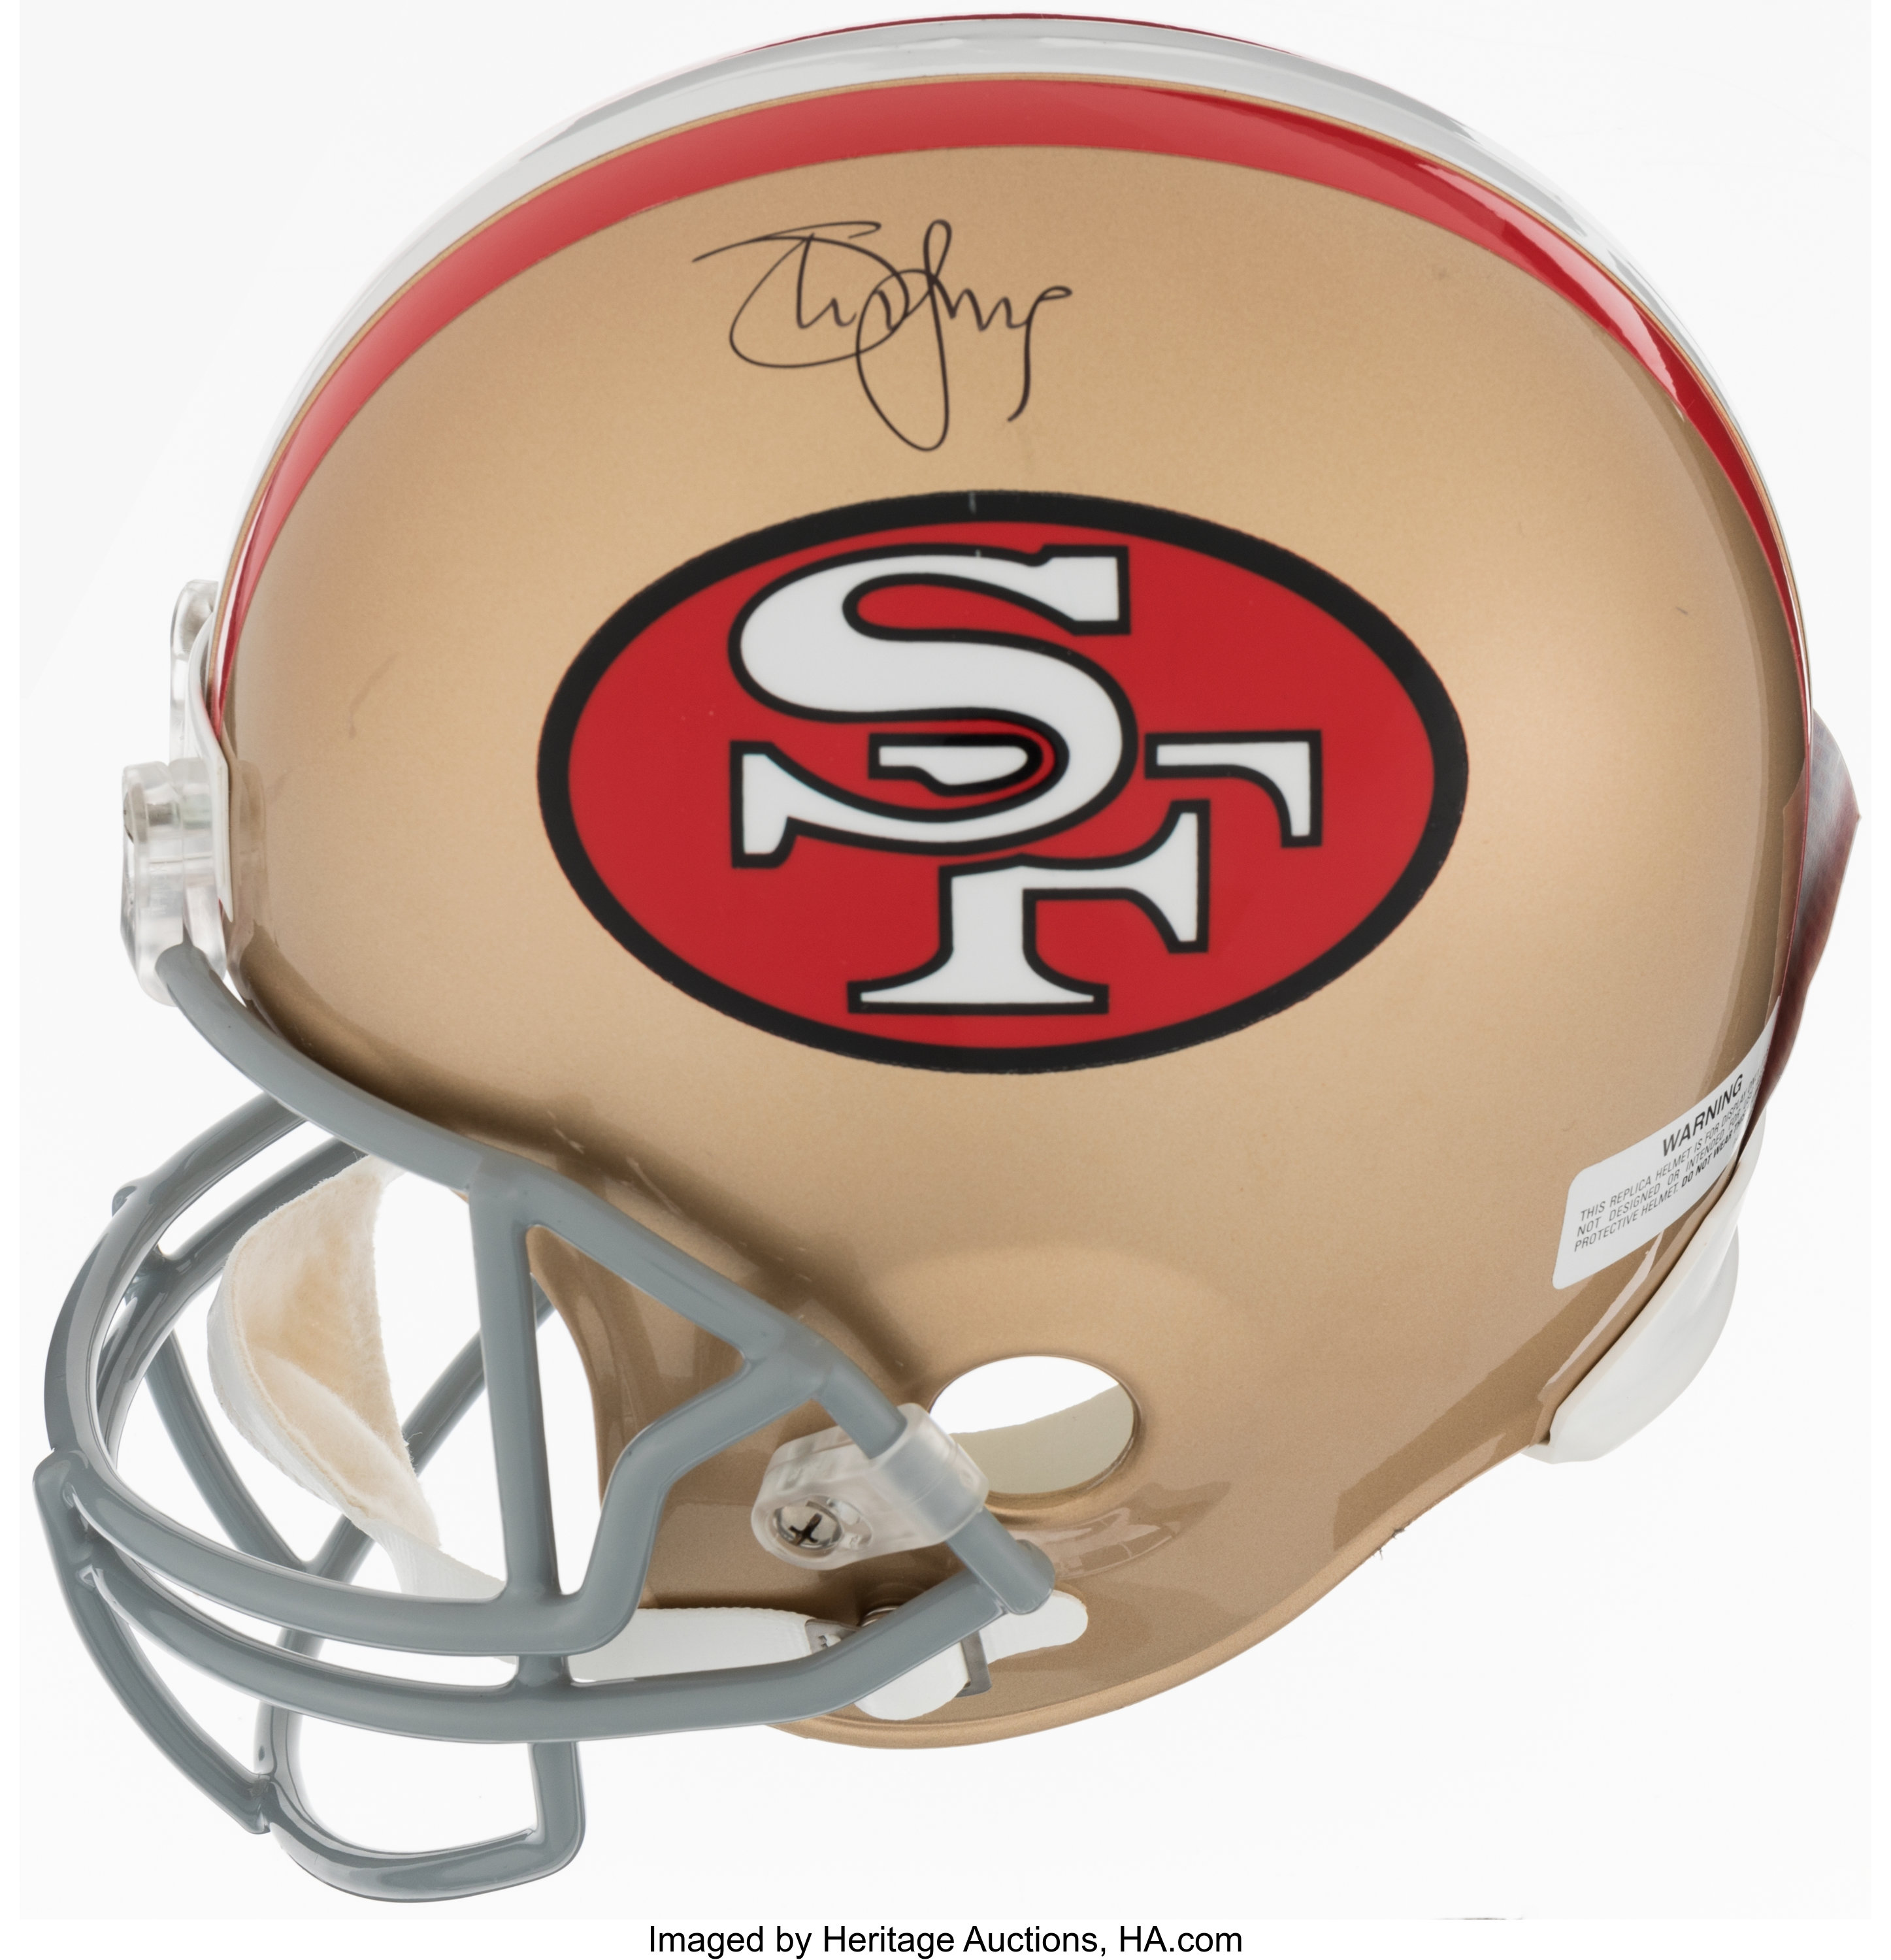 Steve Young Jerry Rice Signed San Francisco 49ers Helmet Lot 43231 Heritage Auctions